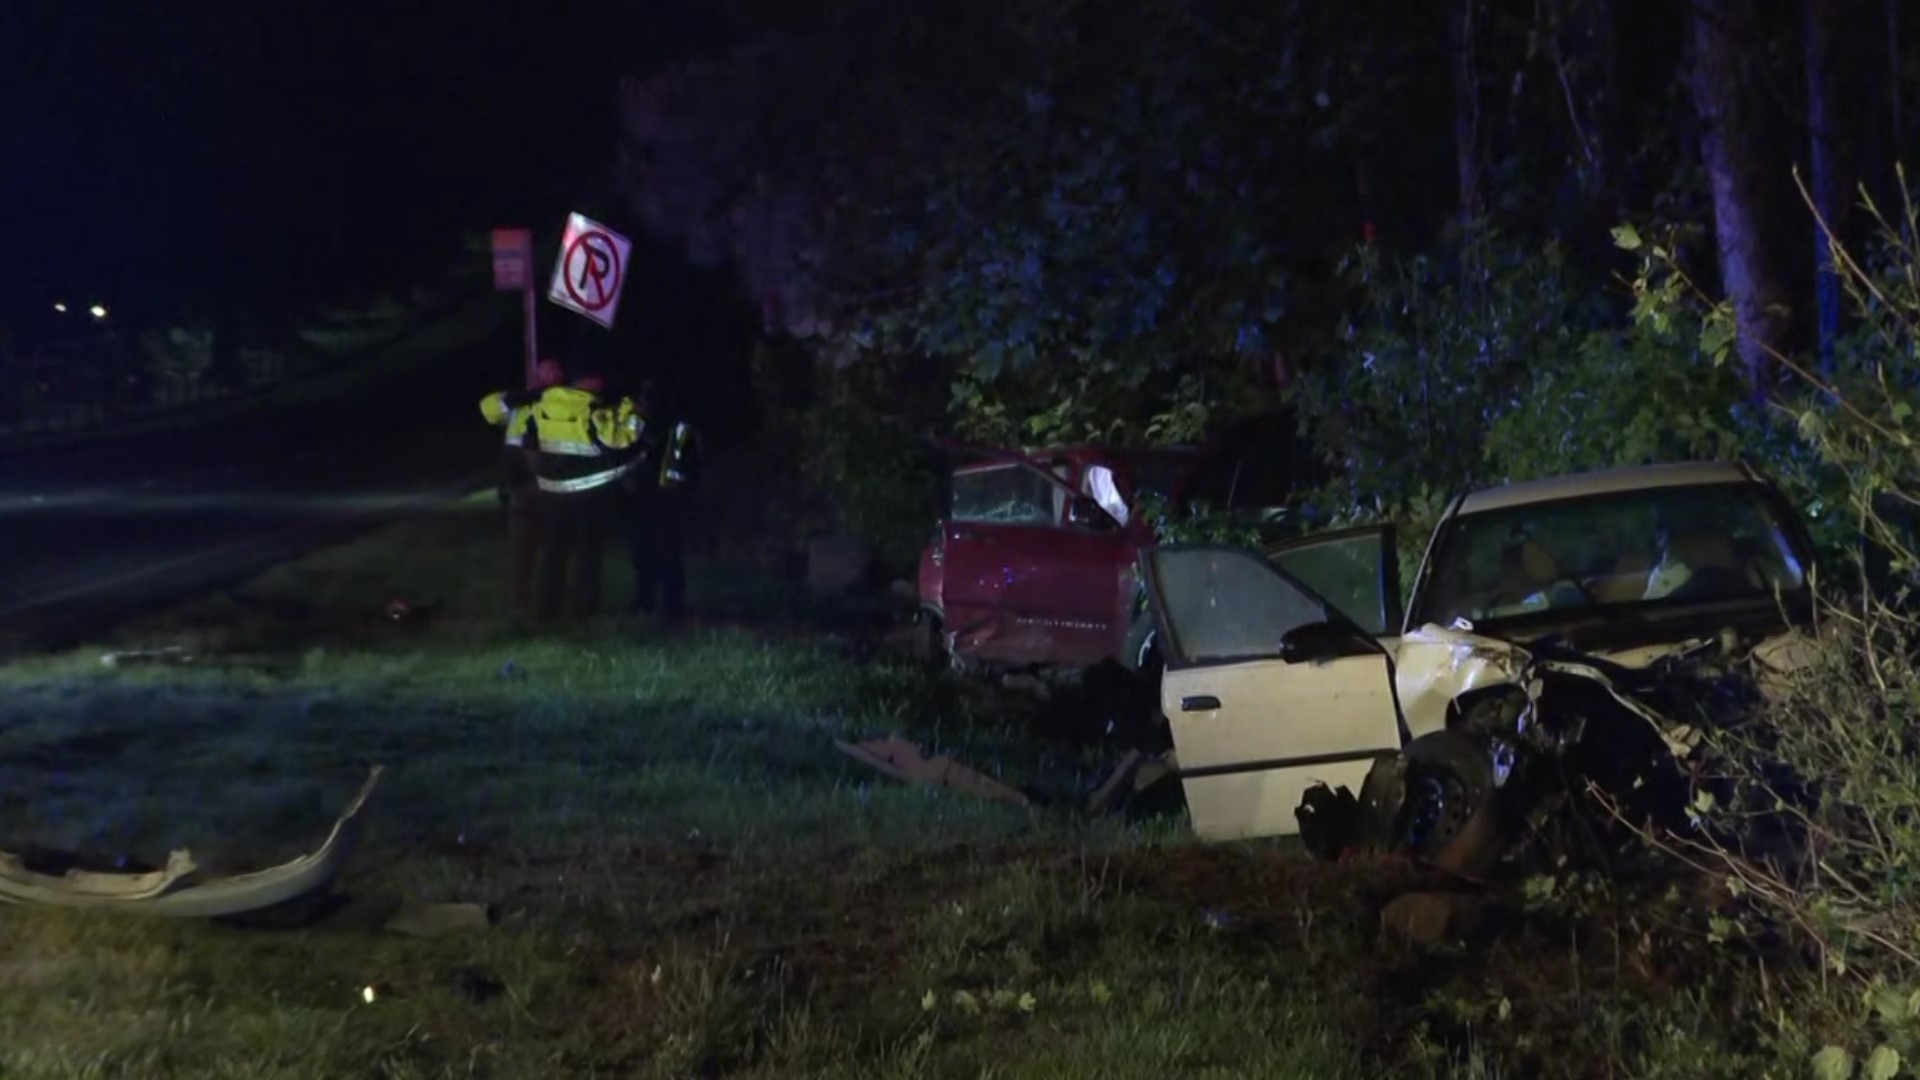 Six people were hurt, including two children, after a multi-vehicle crash near South Fulton Parkway Friday night, Union City officials said.